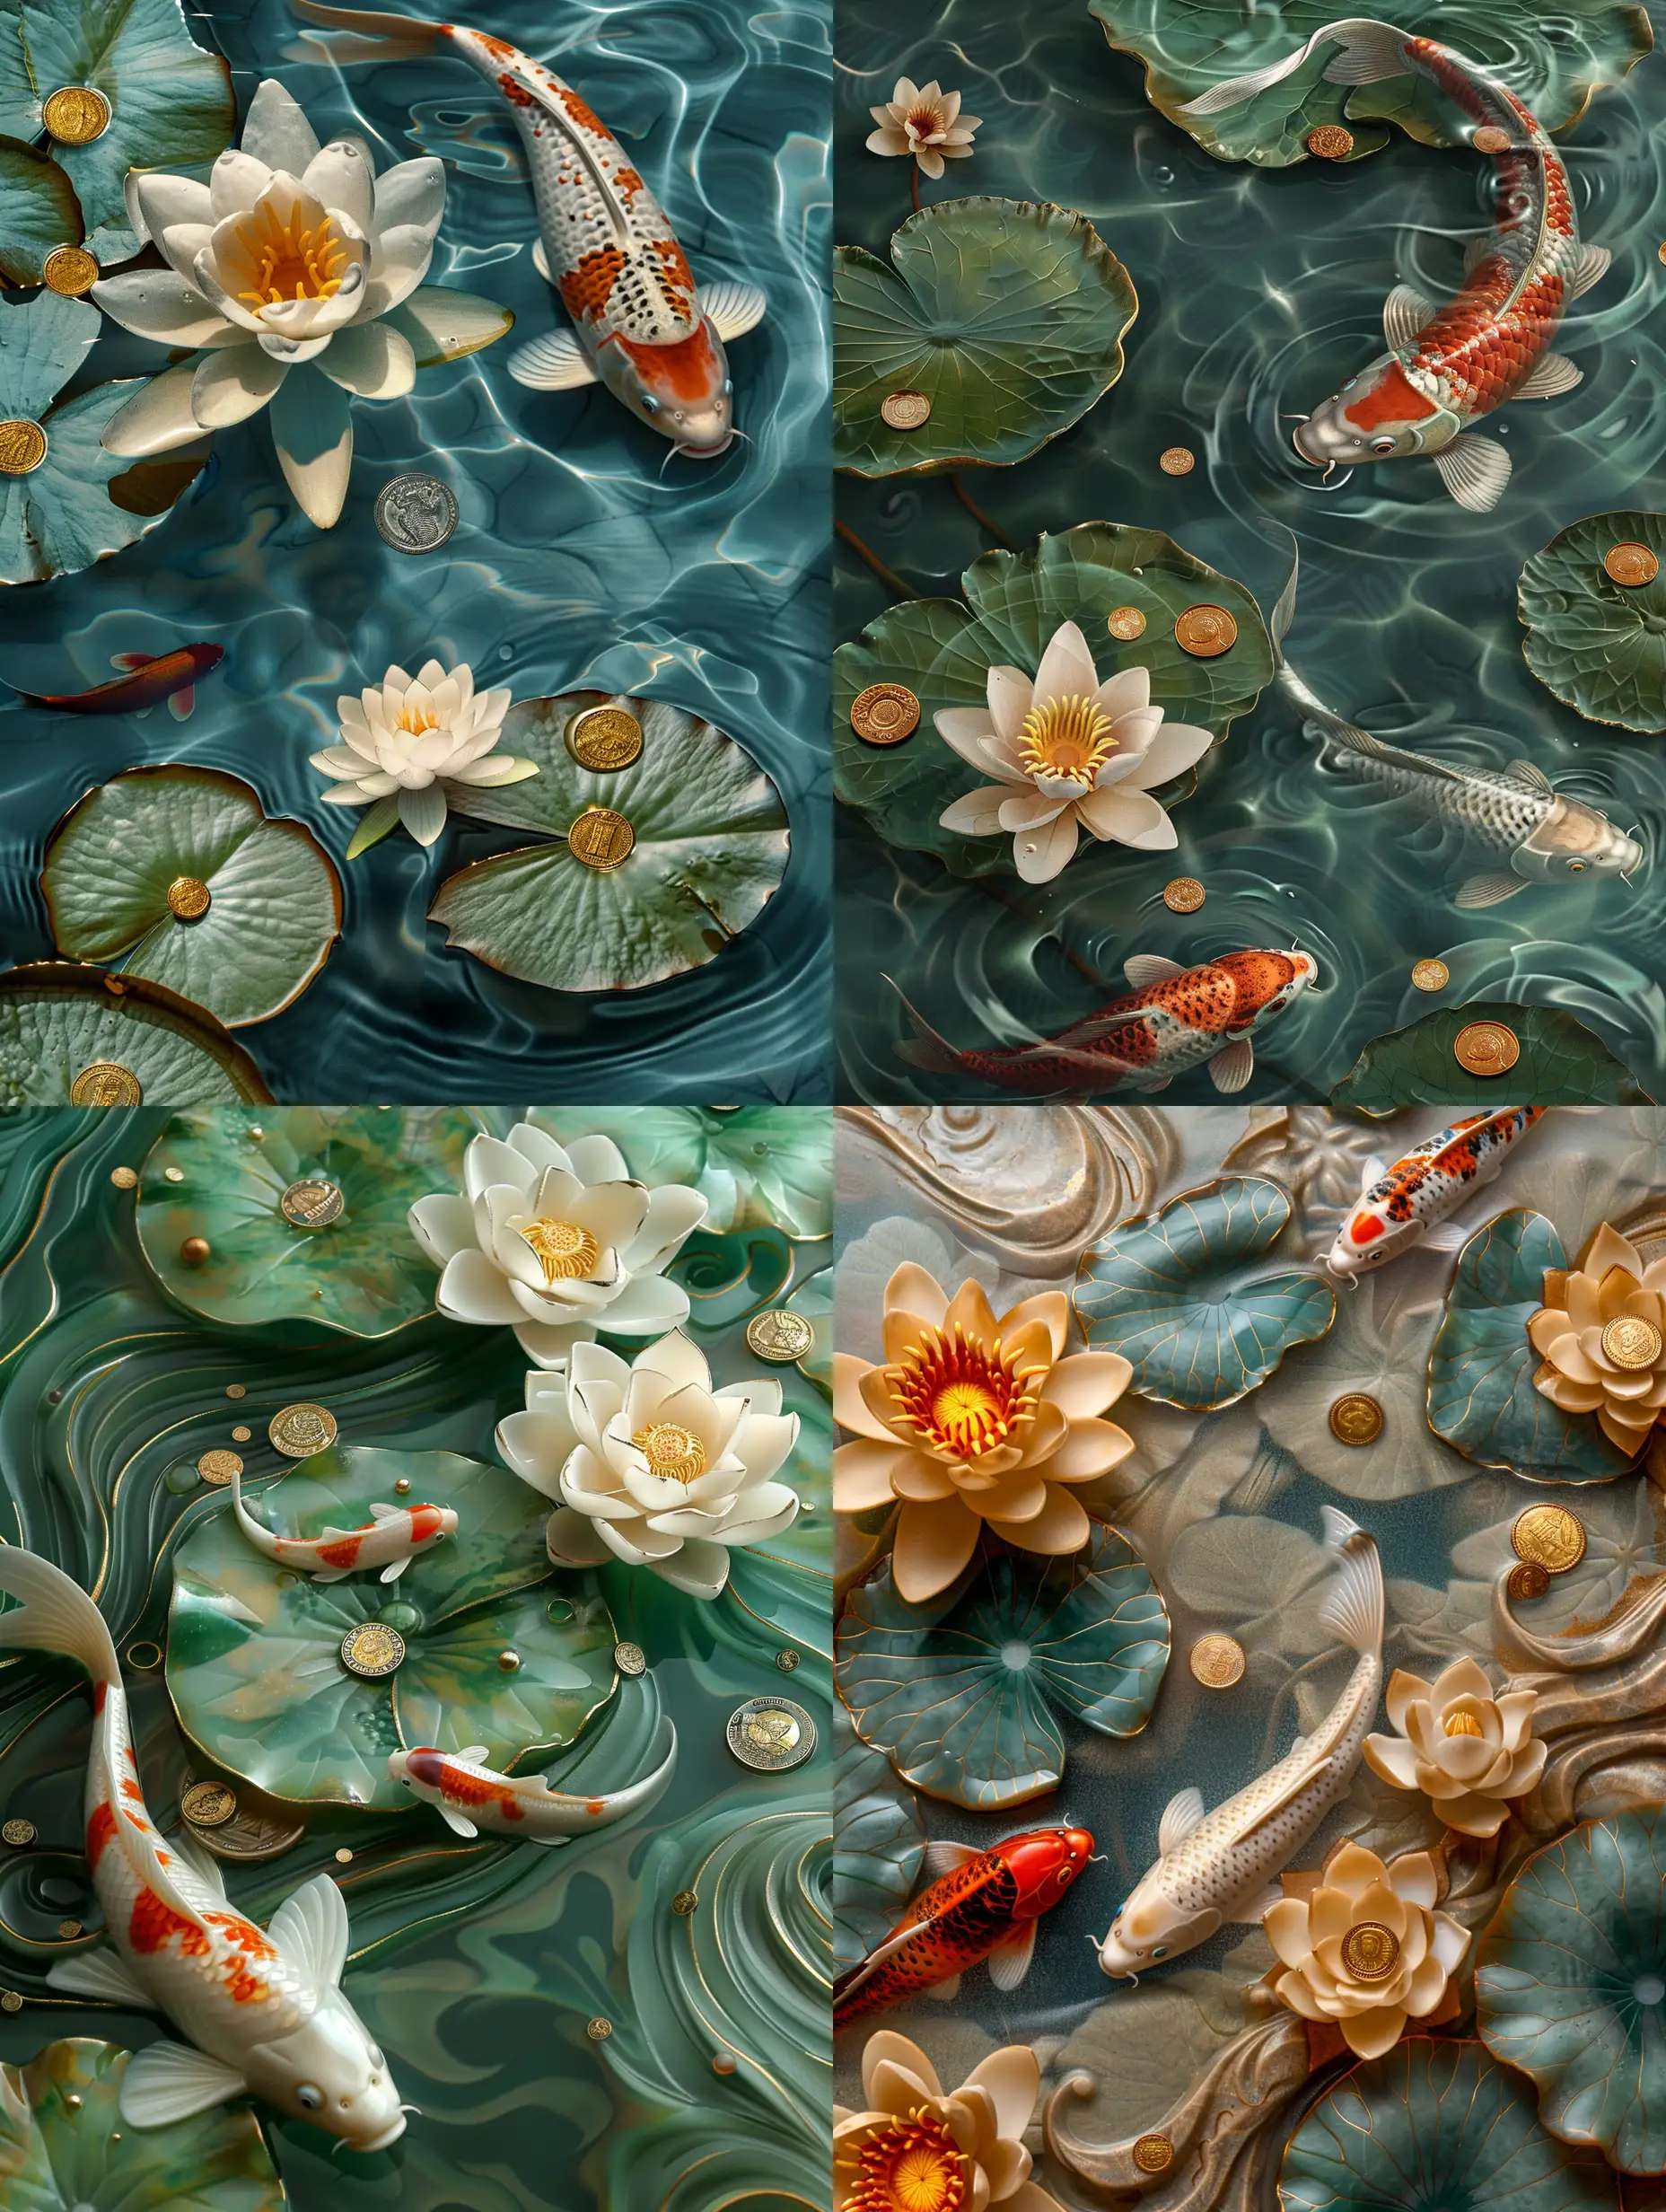 Tranquil-Koi-Pond-with-GoldInlaid-Jade-Carvings-and-Sunlit-Water-Reflections